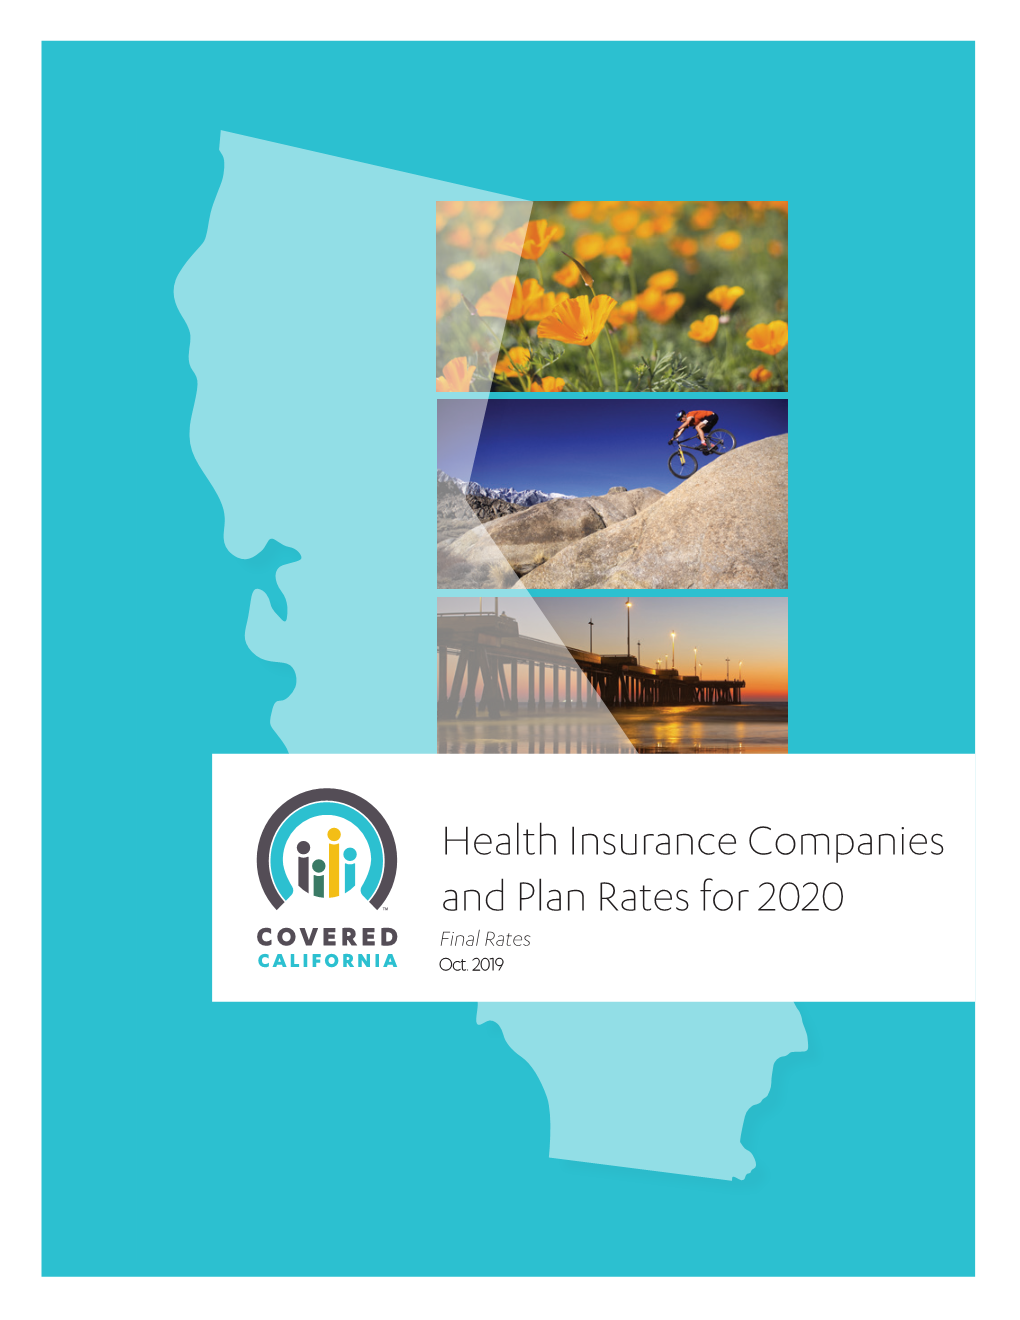 Health Insurance Companies and Plan Rates for 2020